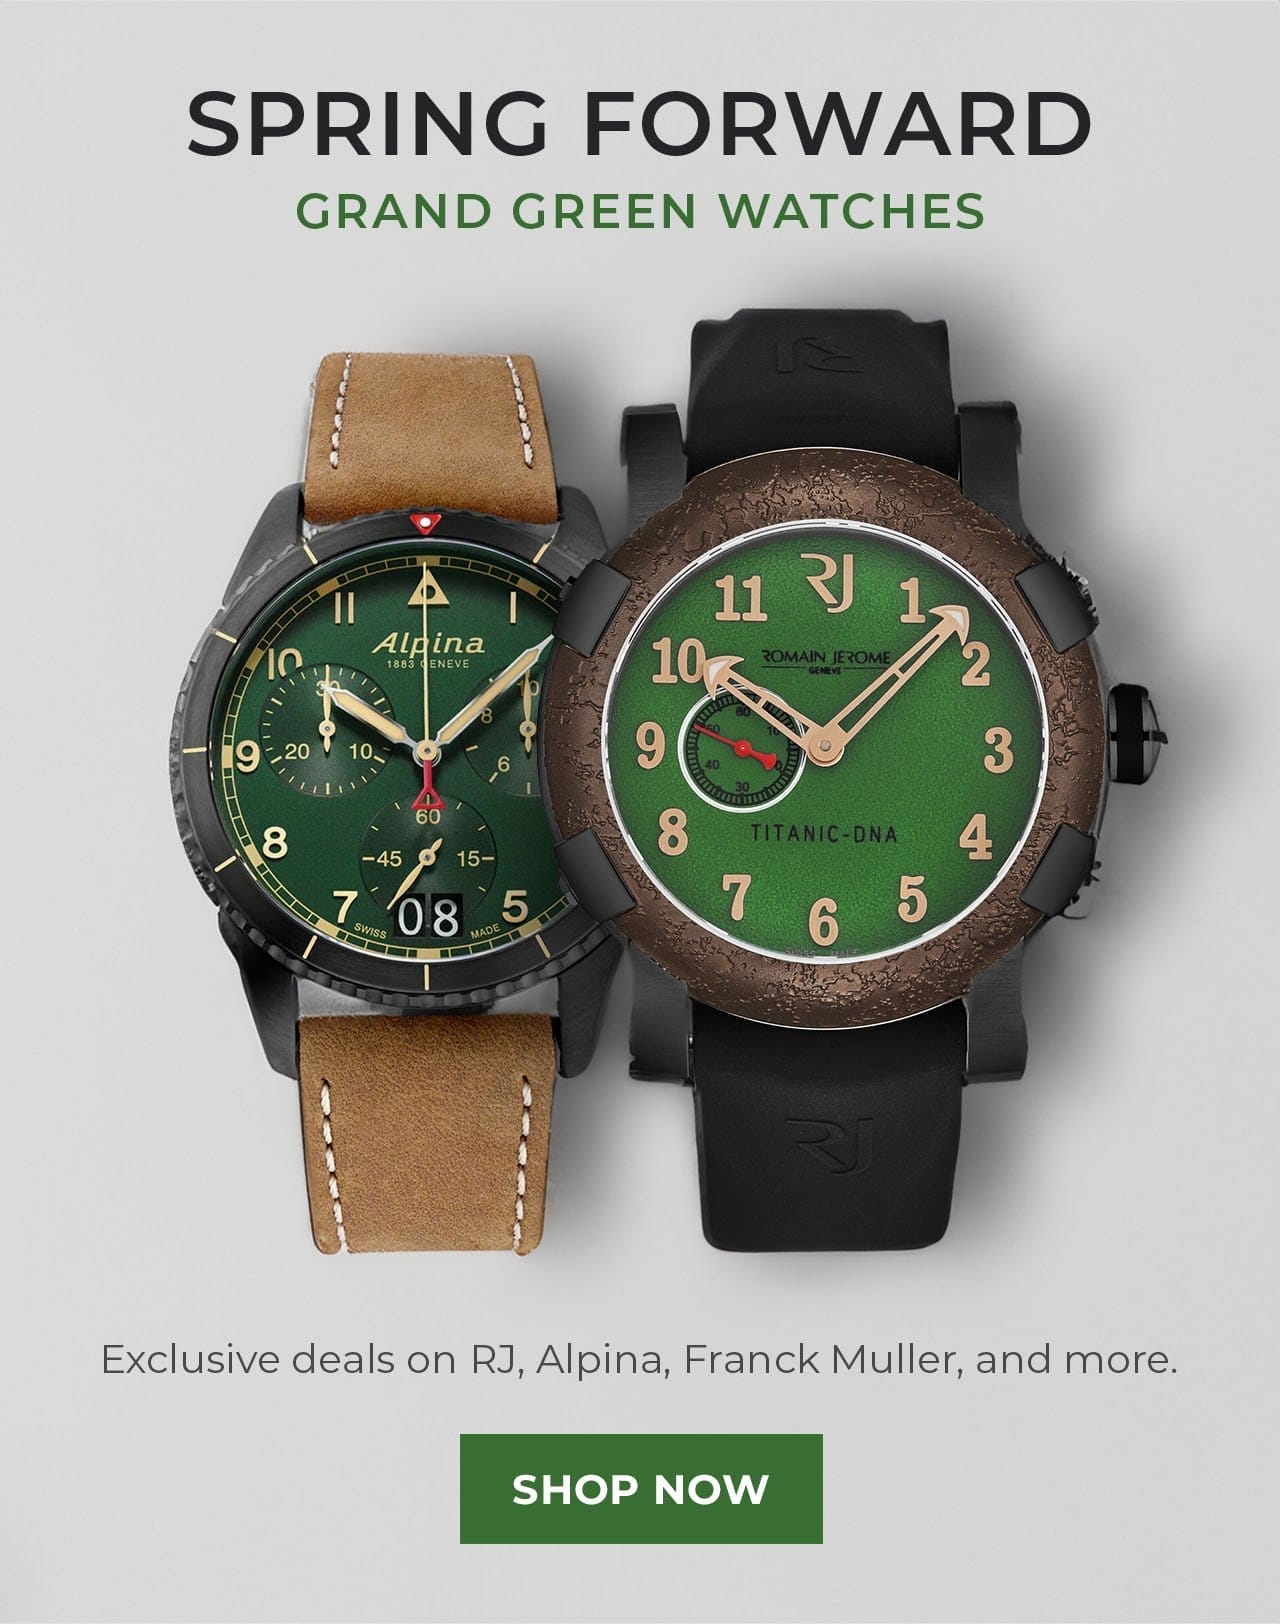 Grand Green Watches | SHOP NOW